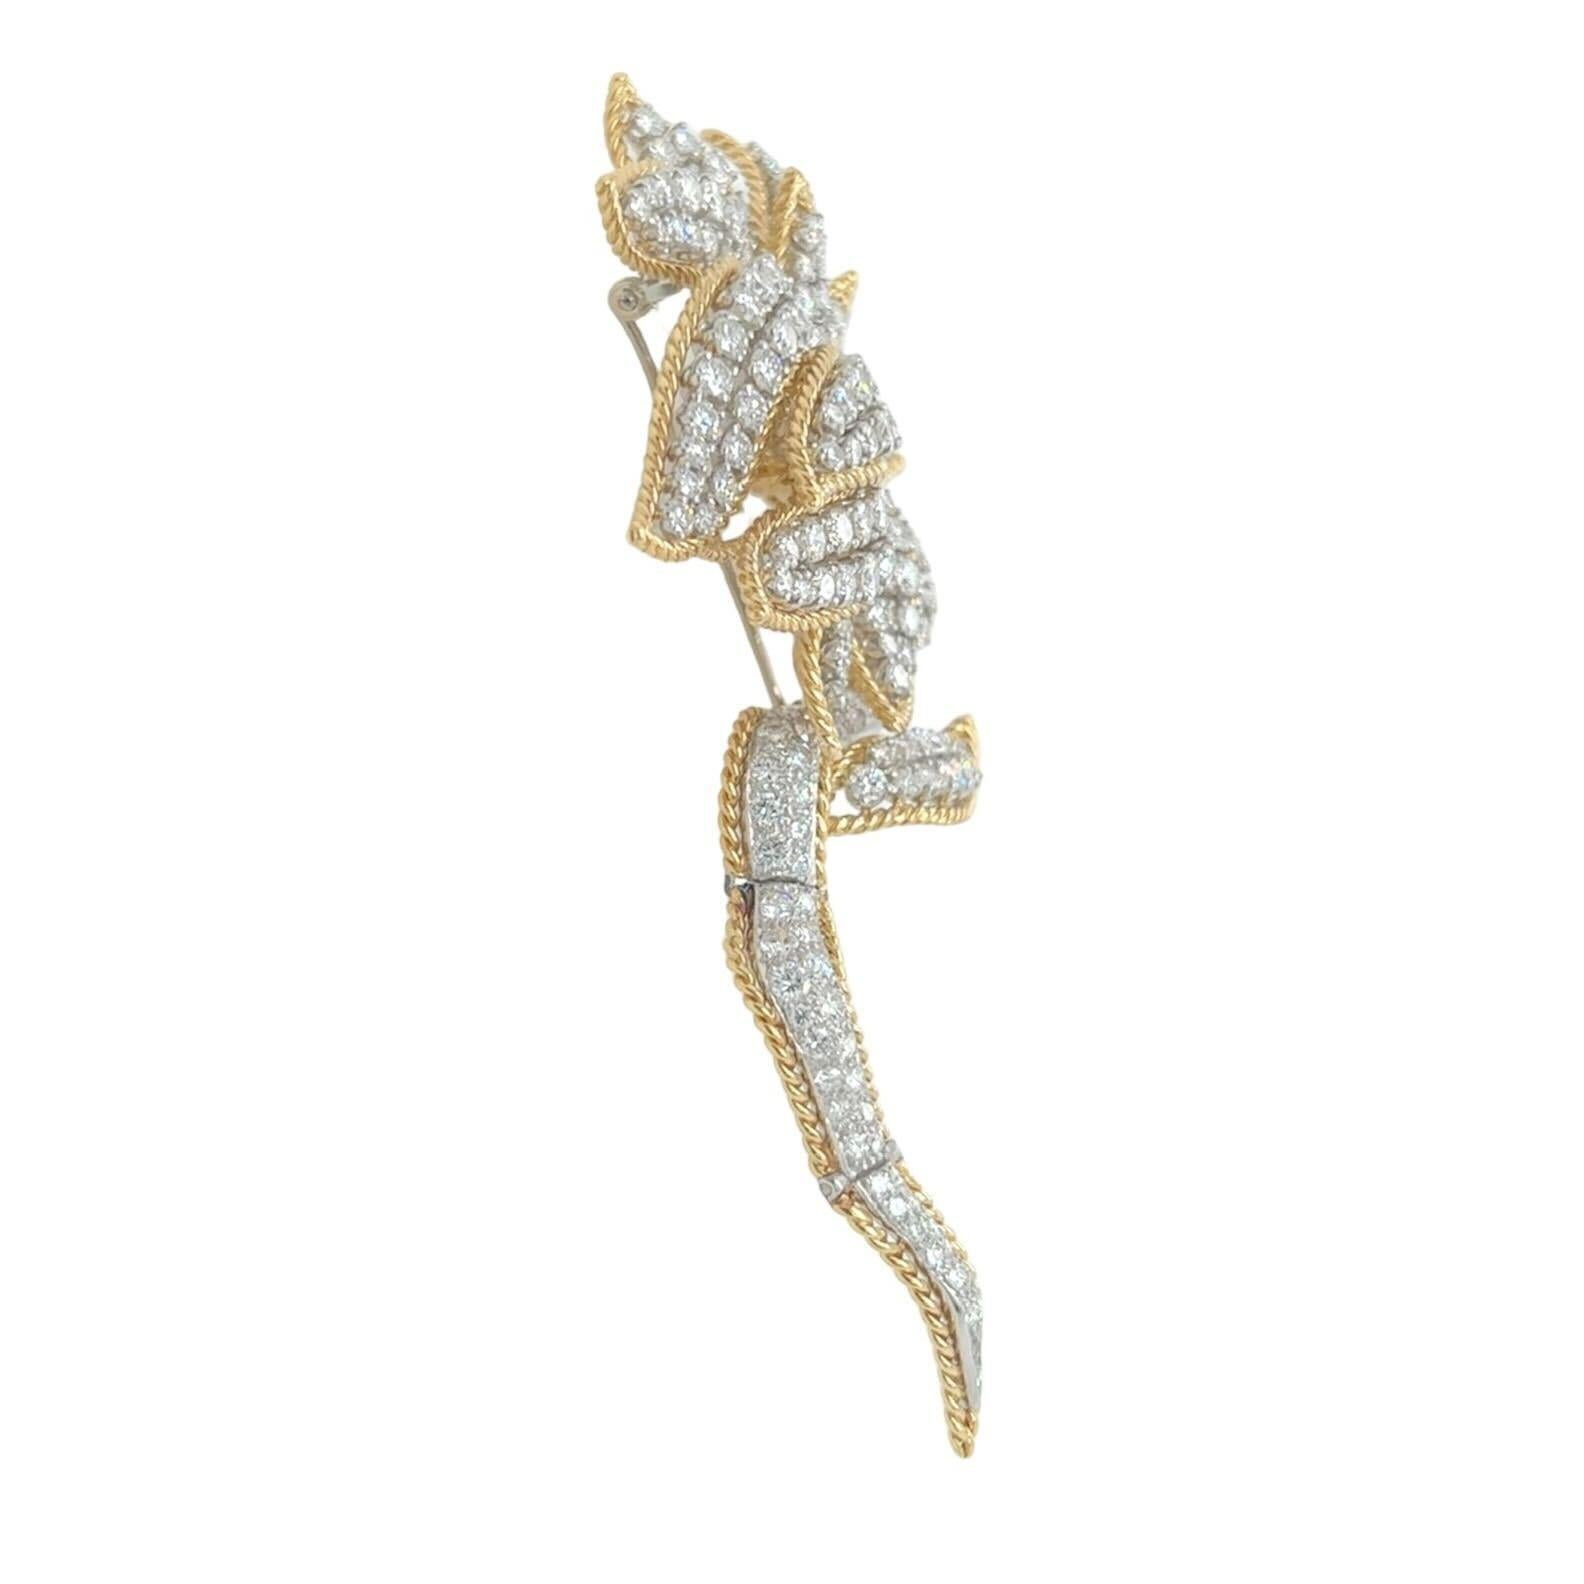 An 18 karat yellow gold, platinum and diamond brooch, Hammerman Brothers.  Designed as a flower, the petals, leaf and flexible stem outlined in gold ropework, enclosing approximately two hundred thirty seven platinum set round brilliant cut